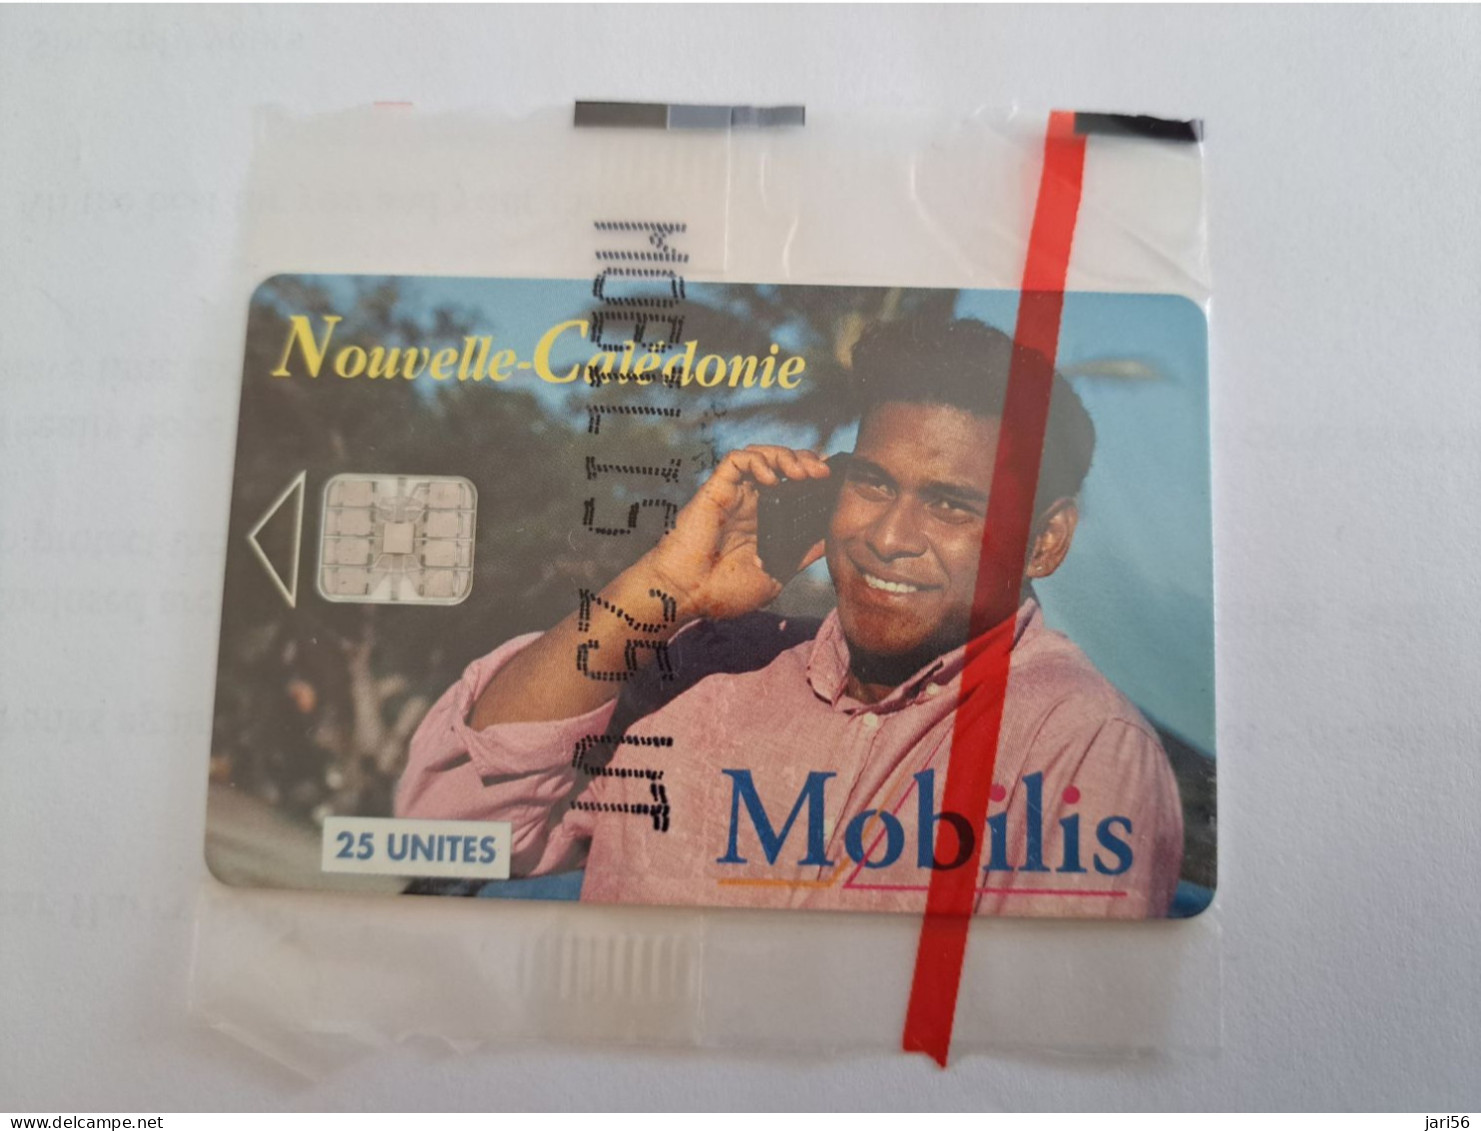 NOUVELLE CALEDONIA  CHIP CARD 25  UNITS / MAN ON THE PHONE /MOBILIS   / MINT IN WRAPPER  ** 13546 ** - Nueva Caledonia